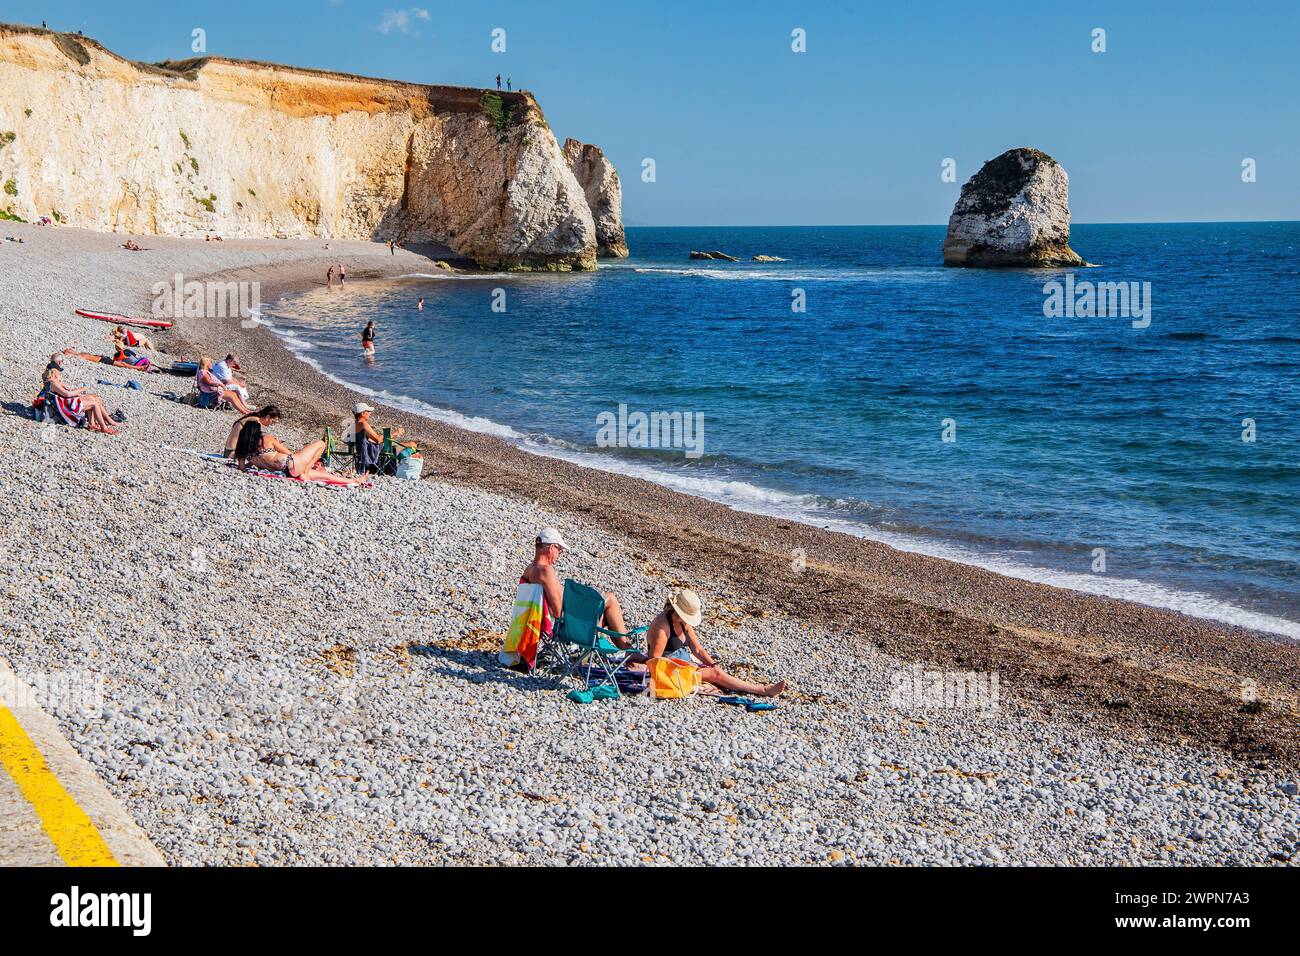 Beach with cliffs at Freshwater Bay, Freshwater, Isle of Wight, Hampshire, Great Britain, England Stock Photo